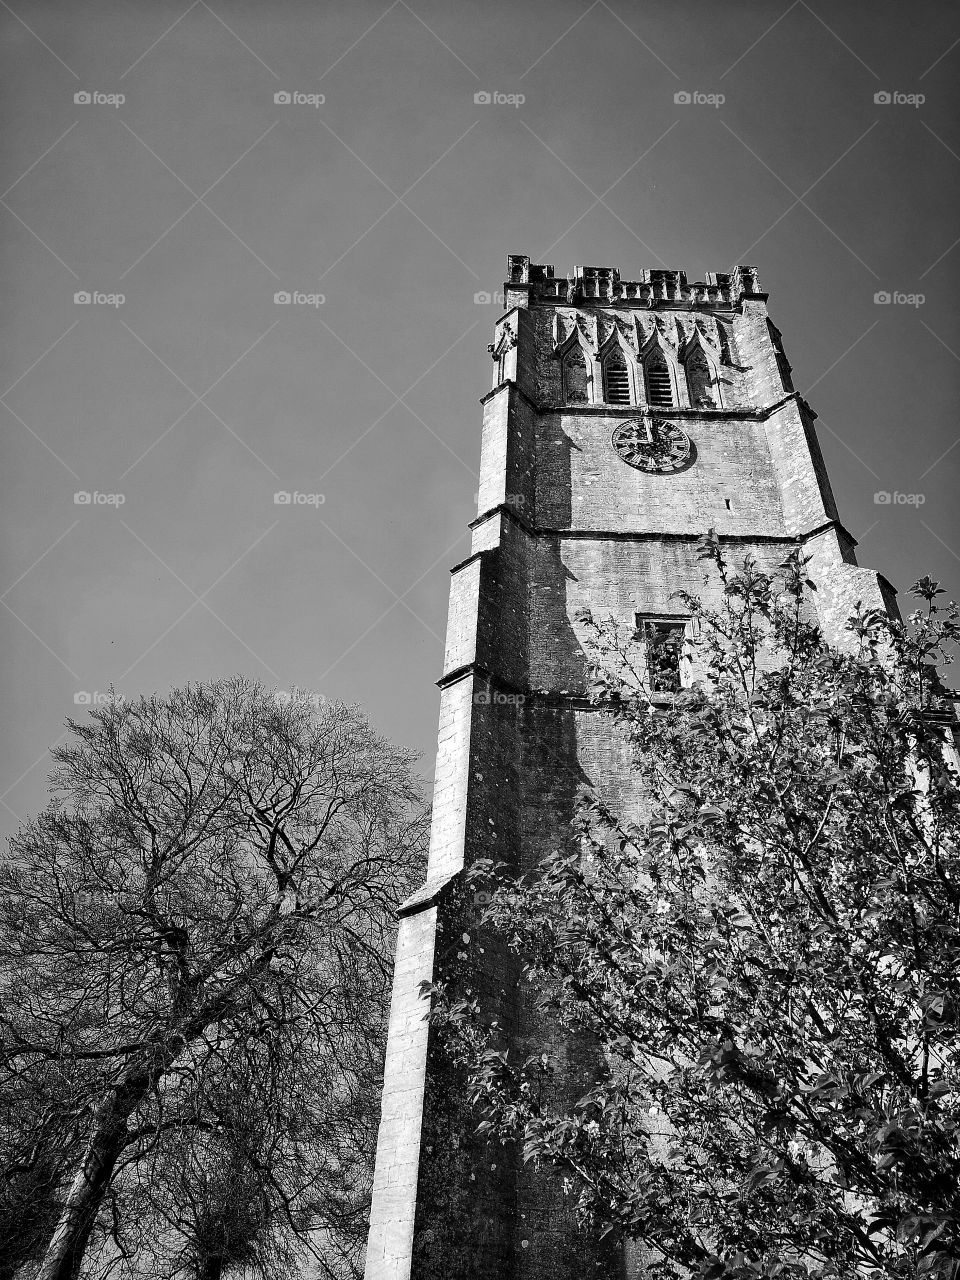 Northleach Church Tower in cotswolds